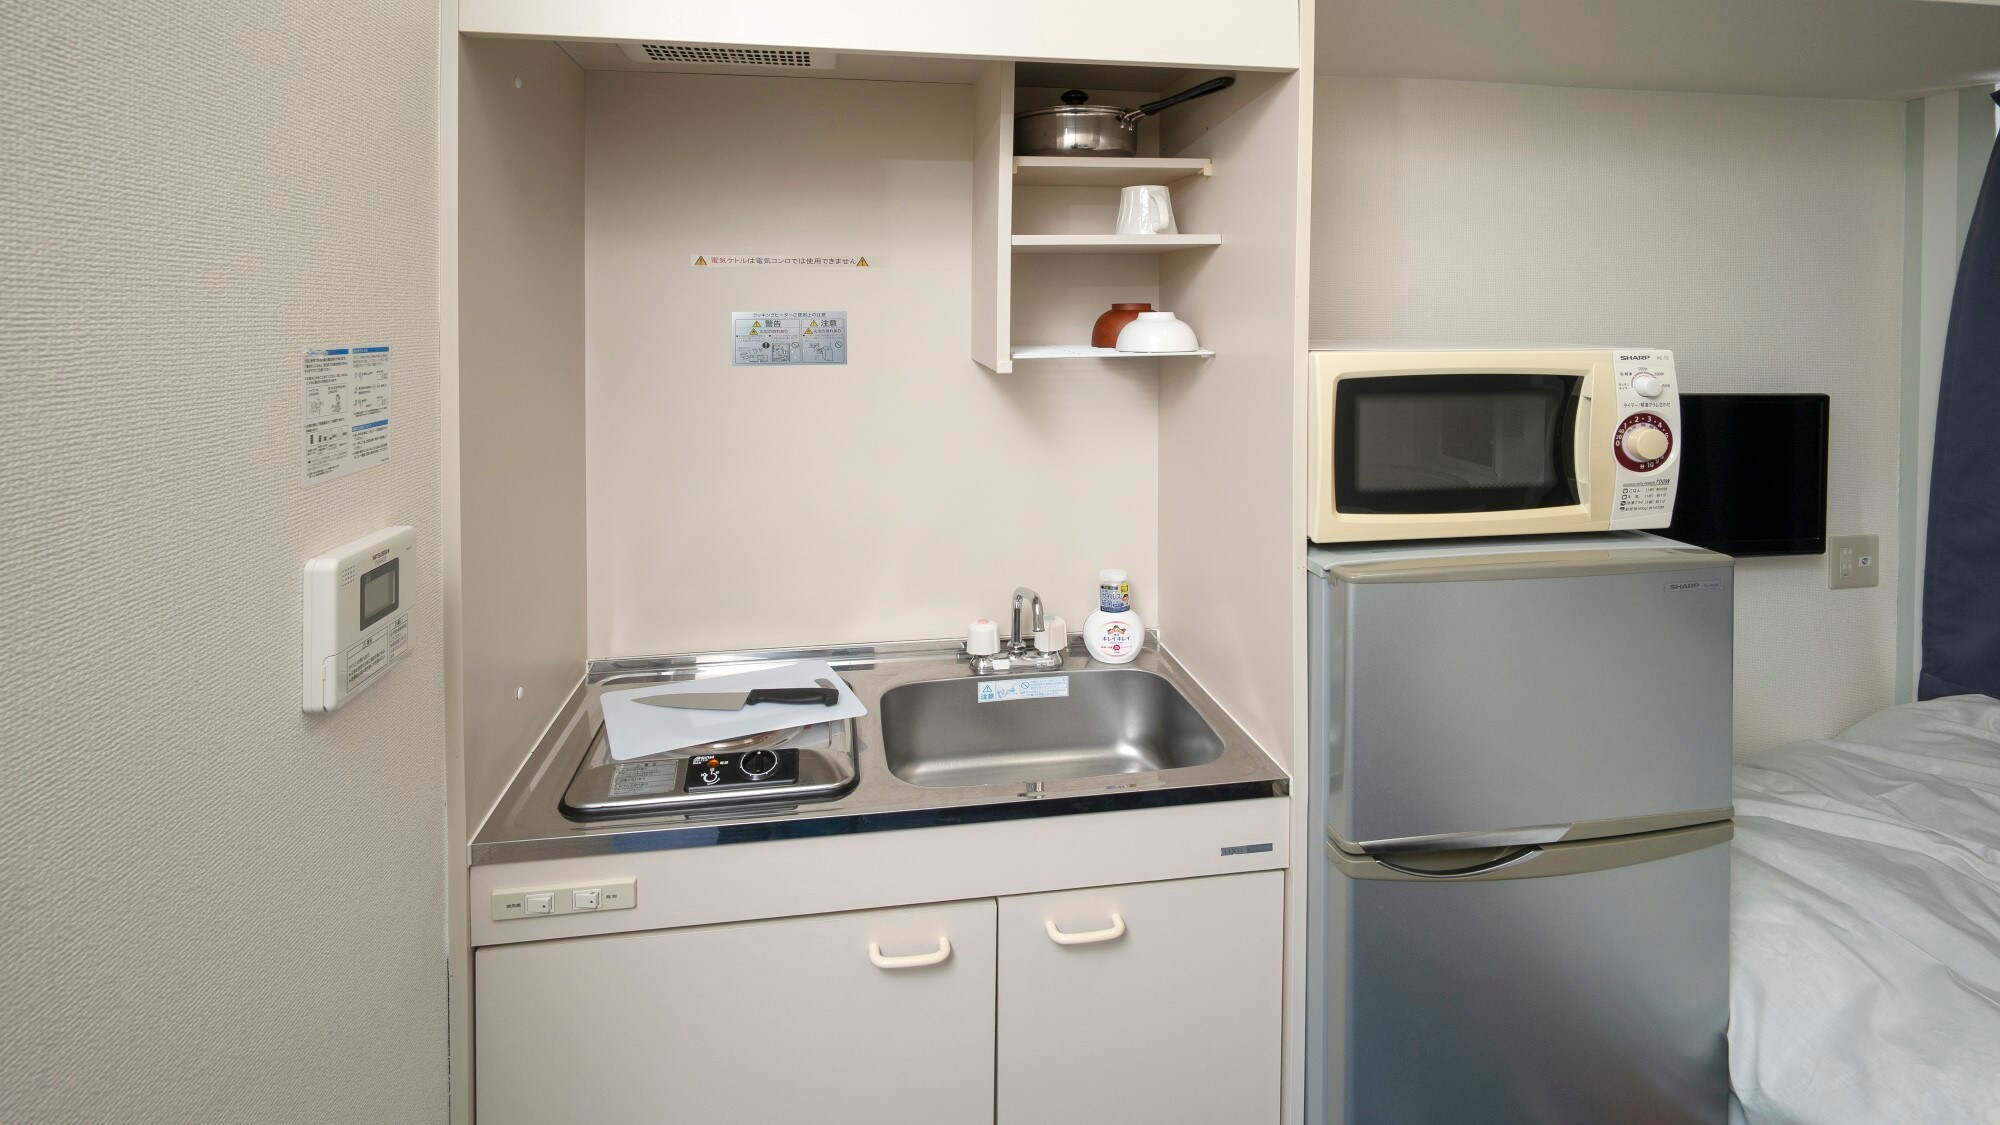 Single room: Each room has a mini-kitchen, so it's convenient to make a small late-night snack.